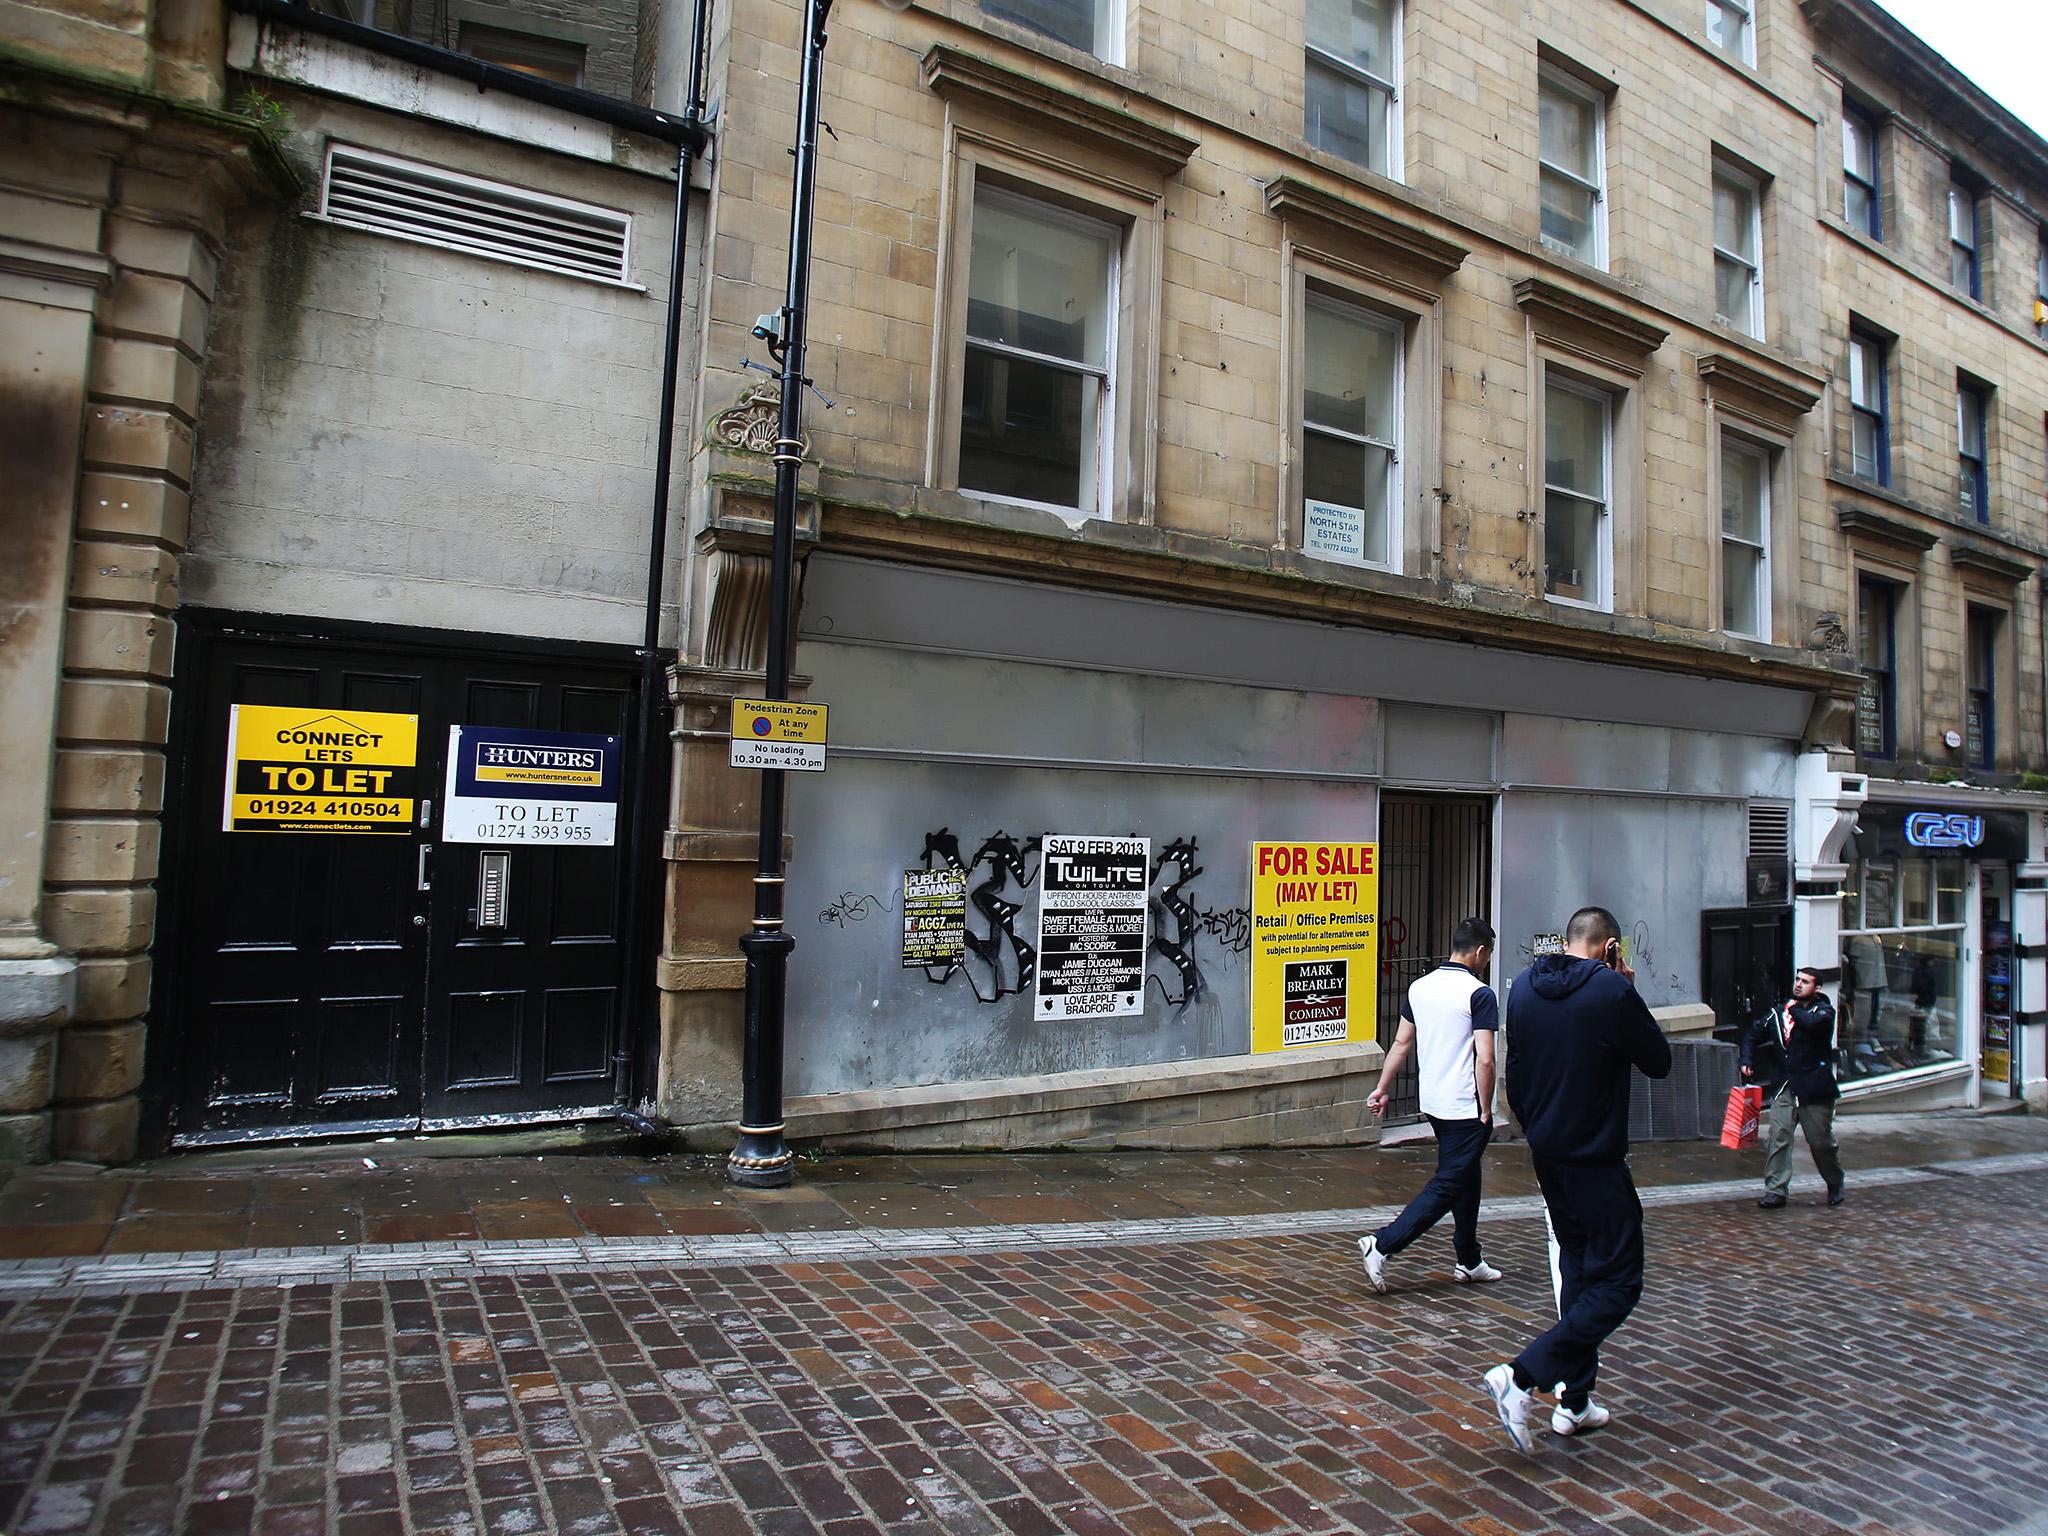 Boarded up shops are increasingly the norm on the British high street